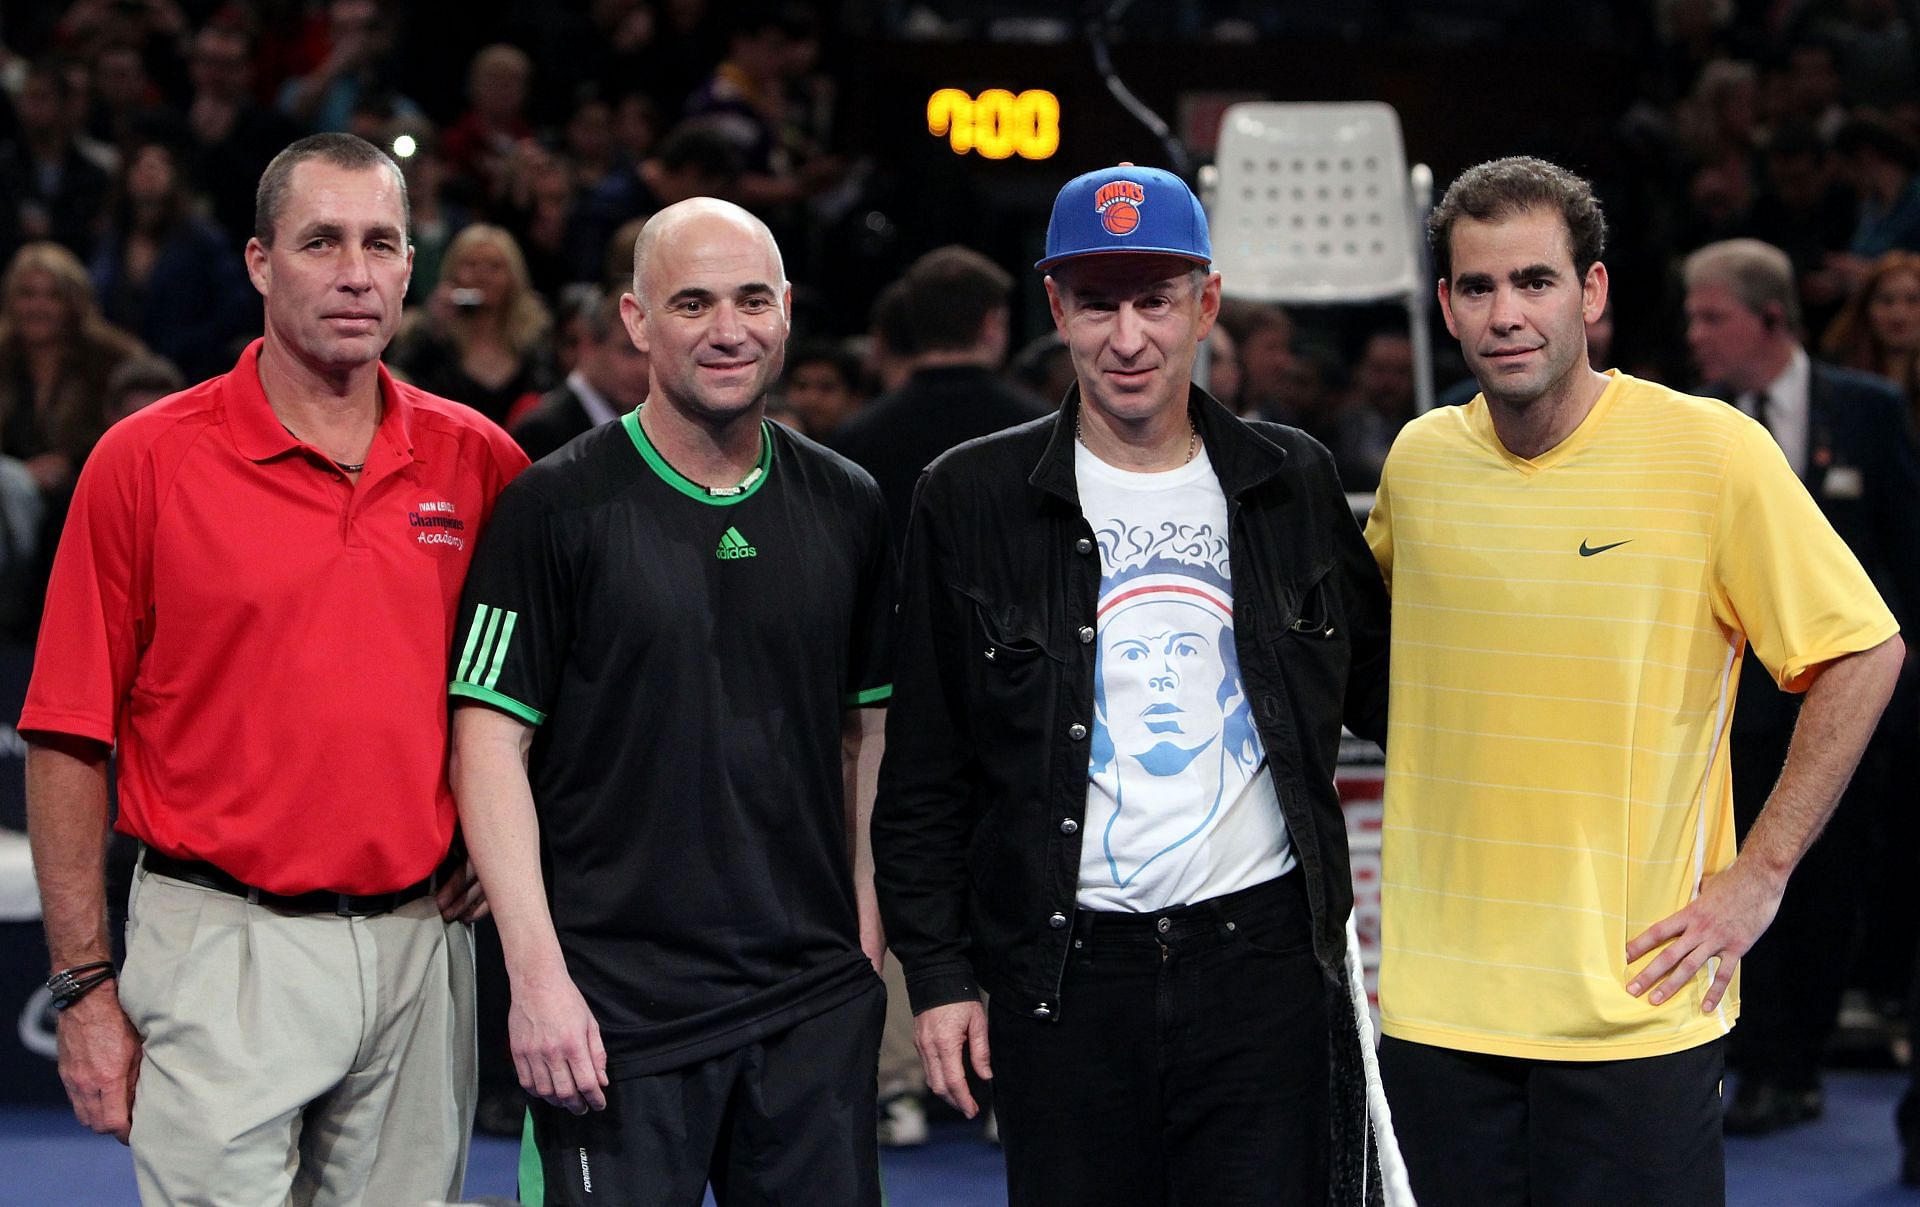 Pete Sampras (first from right) and Andre Agassi (second from left)